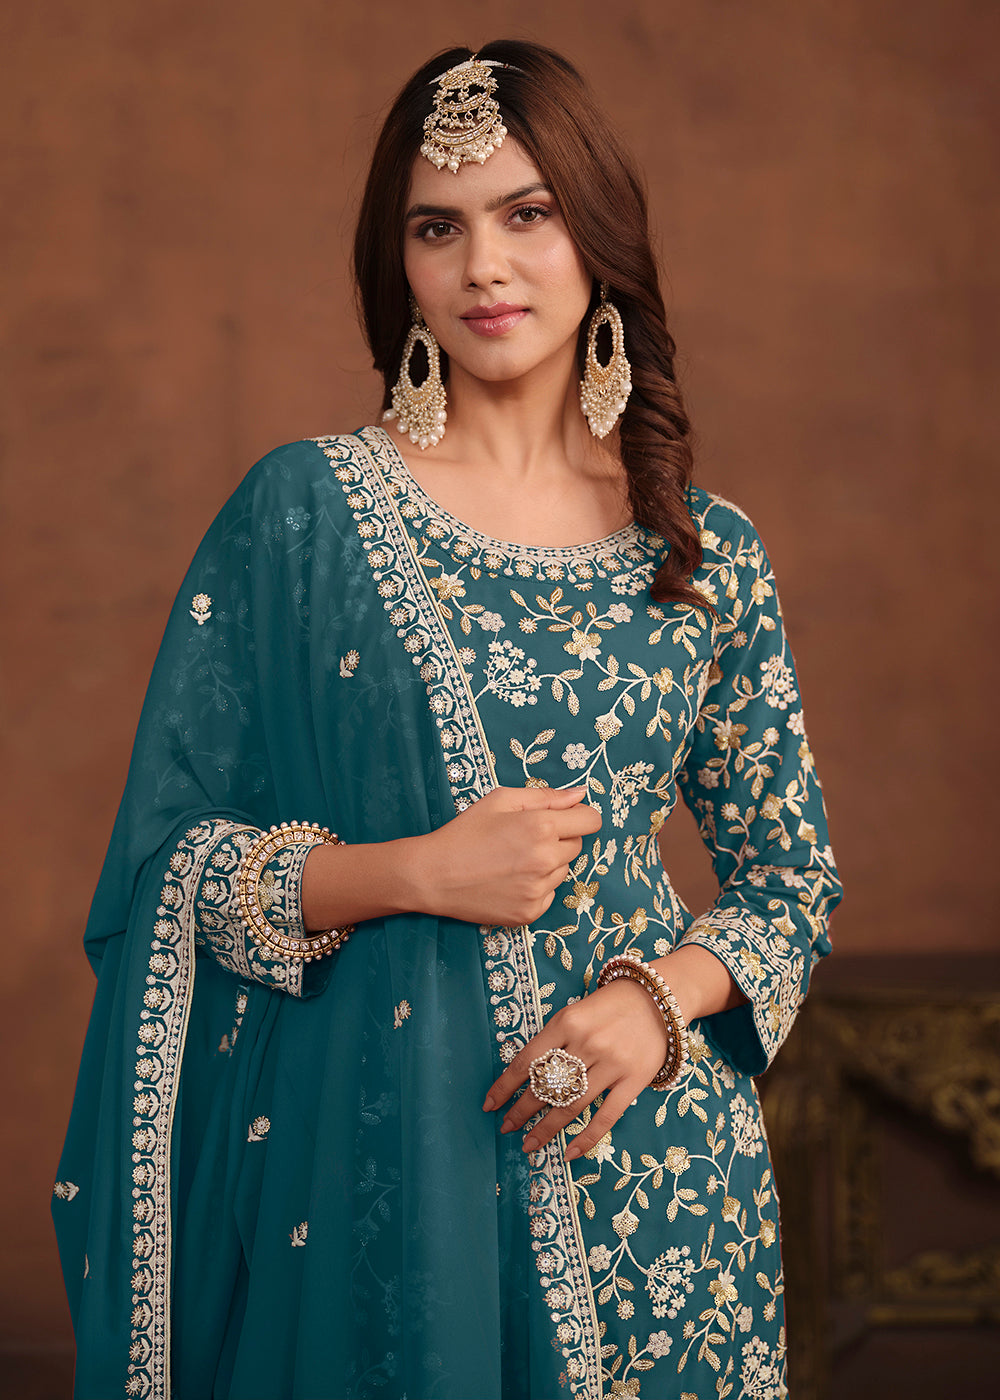 Buy Now Faux Georgette Teal Blue Embroidered Festive Salwar Suit Online in USA, UK, Canada, Germany, Australia & Worldwide at Empress Clothing. 